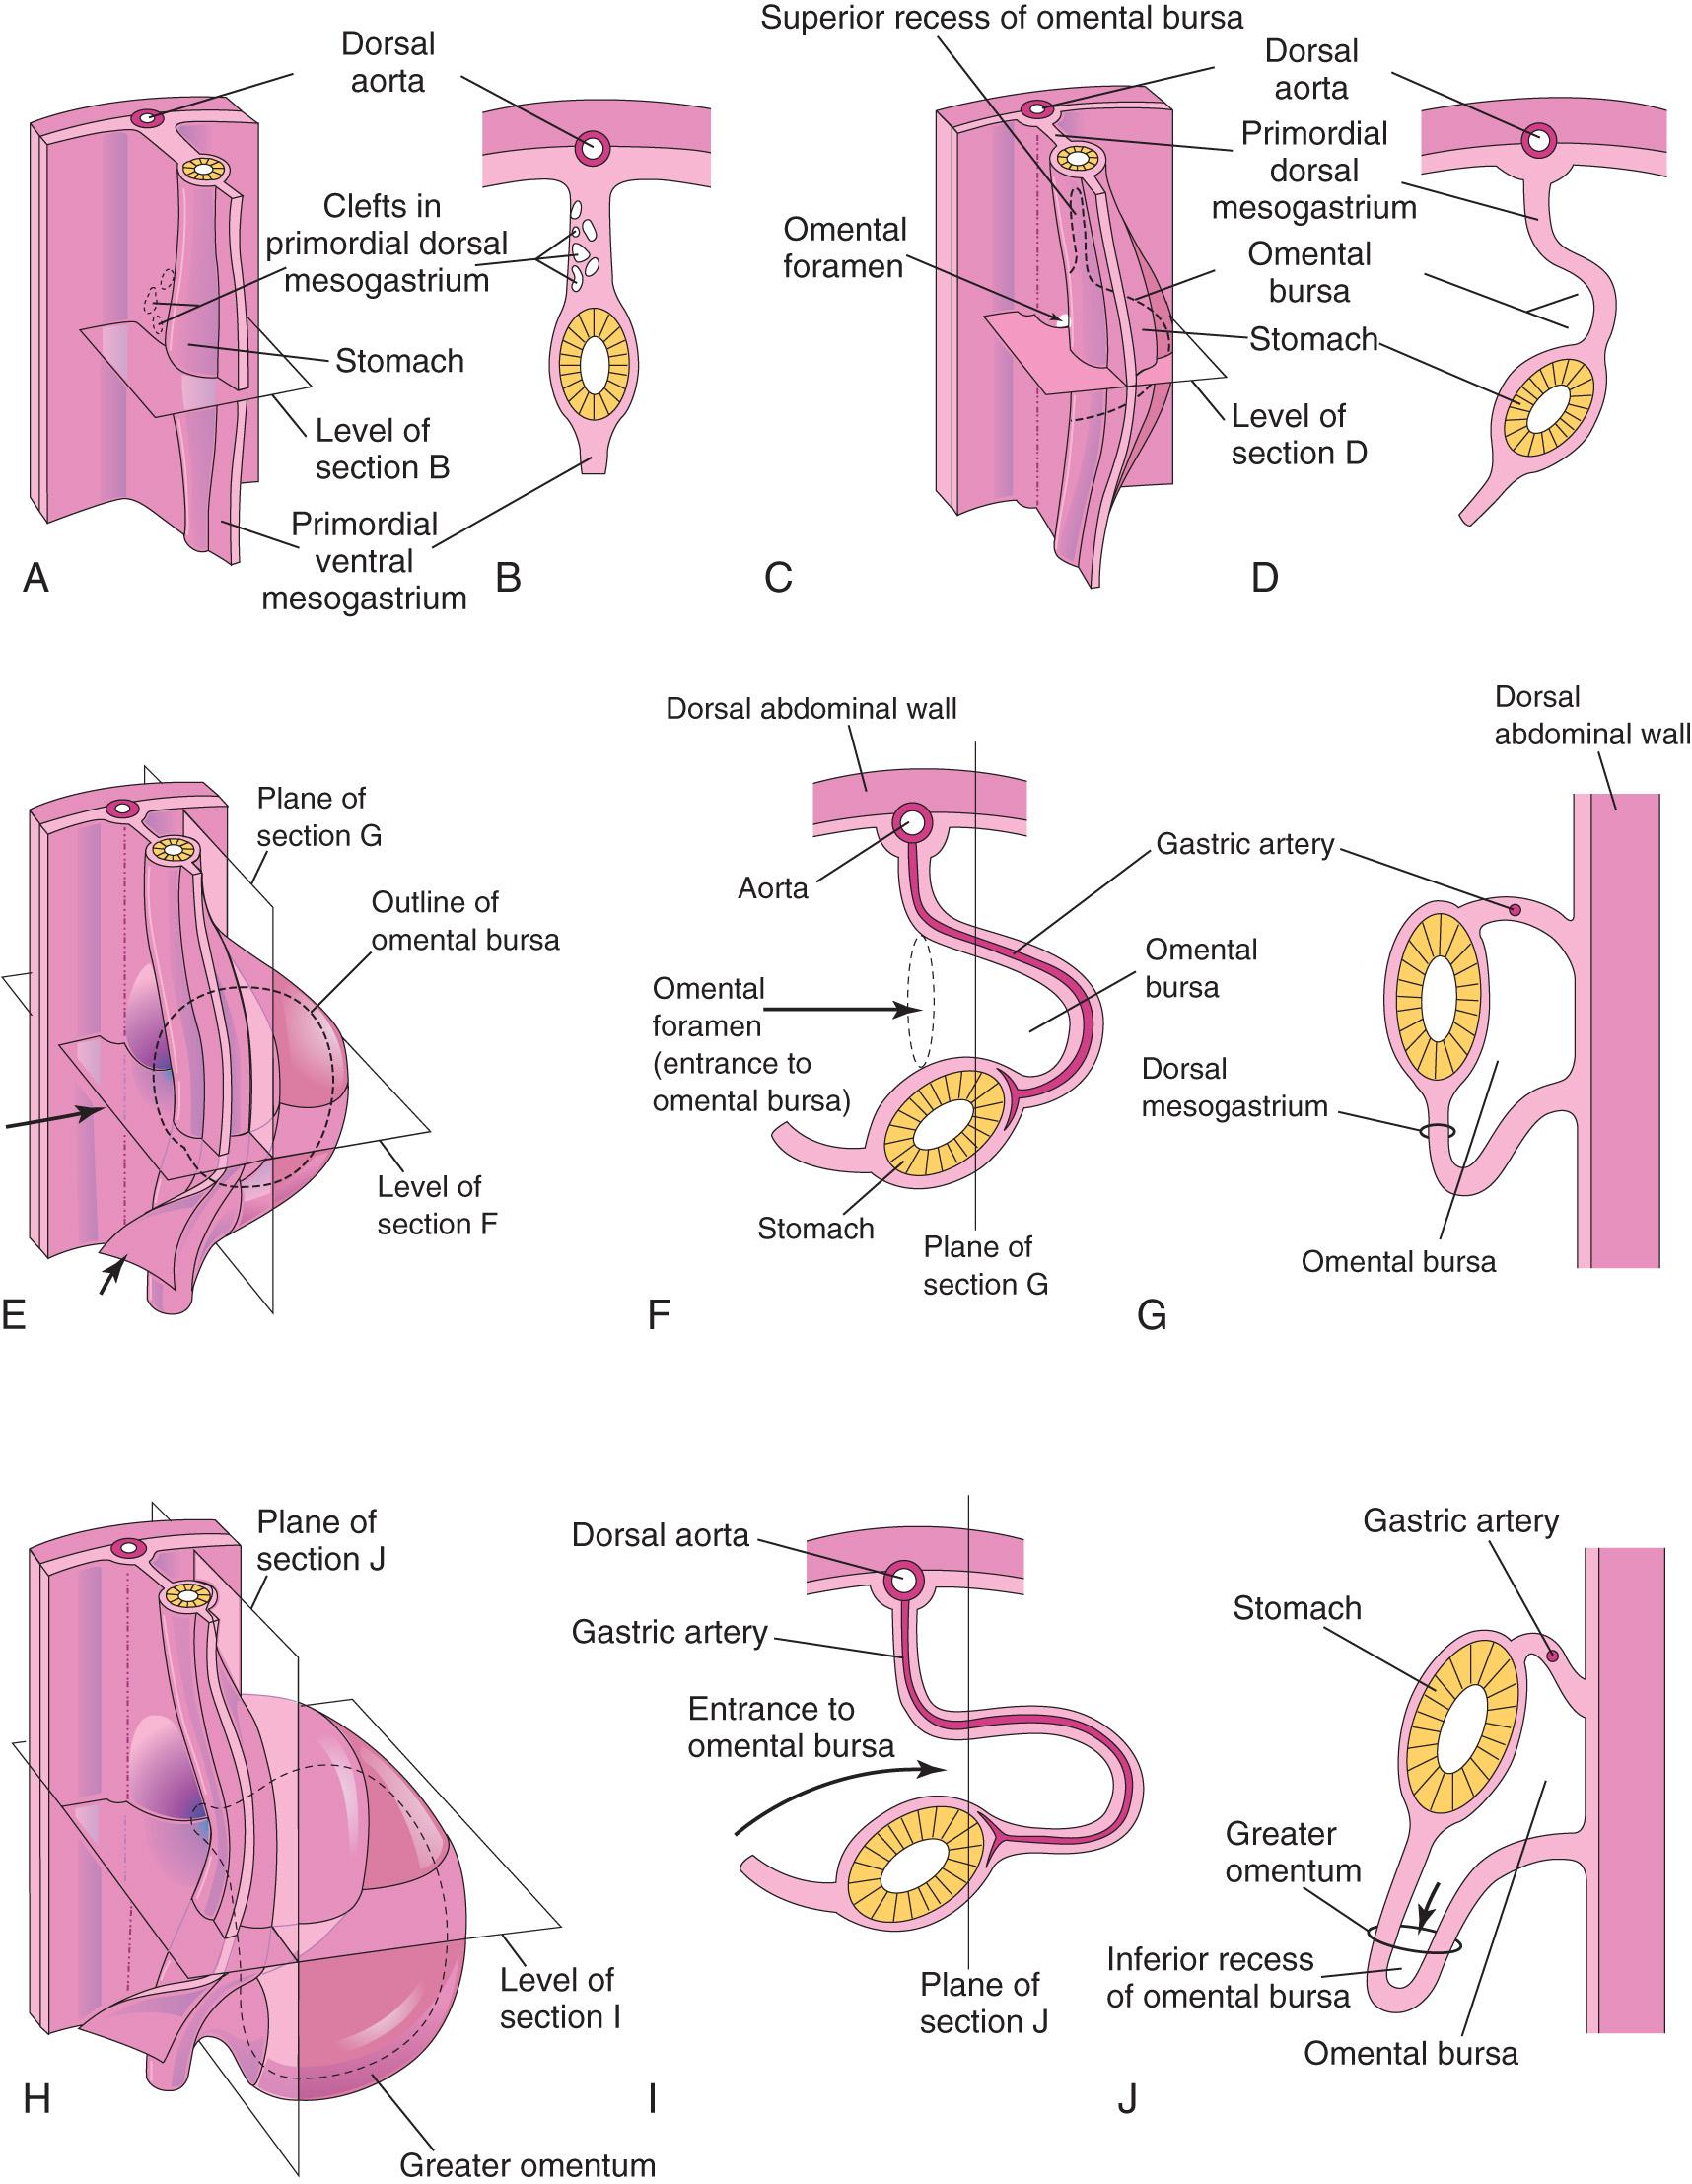 Fig. 11.3, Development of stomach and mesenteries and formation of omental bursa. A , Embryo of 5 weeks. B , Transverse section showing clefts in the dorsal mesogastrium. C , Later stage after coalescence of the clefts to form the omental bursa. D , Transverse section showing the initial appearance of the omental bursa. E , The dorsal mesentery has elongated, and the omental bursa has enlarged. F and G , Transverse and sagittal sections, respectively, showing elongation of the dorsal mesogastrium and expansion of the omental bursa. H , Embryo of 6 weeks showing the greater omentum and expansion of the omental bursa. I and J , Transverse and sagittal sections, respectively, showing the inferior recess of the omental bursa and the omental foramen. The arrows in E , F , and I indicate the site of the omental foramen. In J , the arrow indicates the inferior recess of the omental bursa.